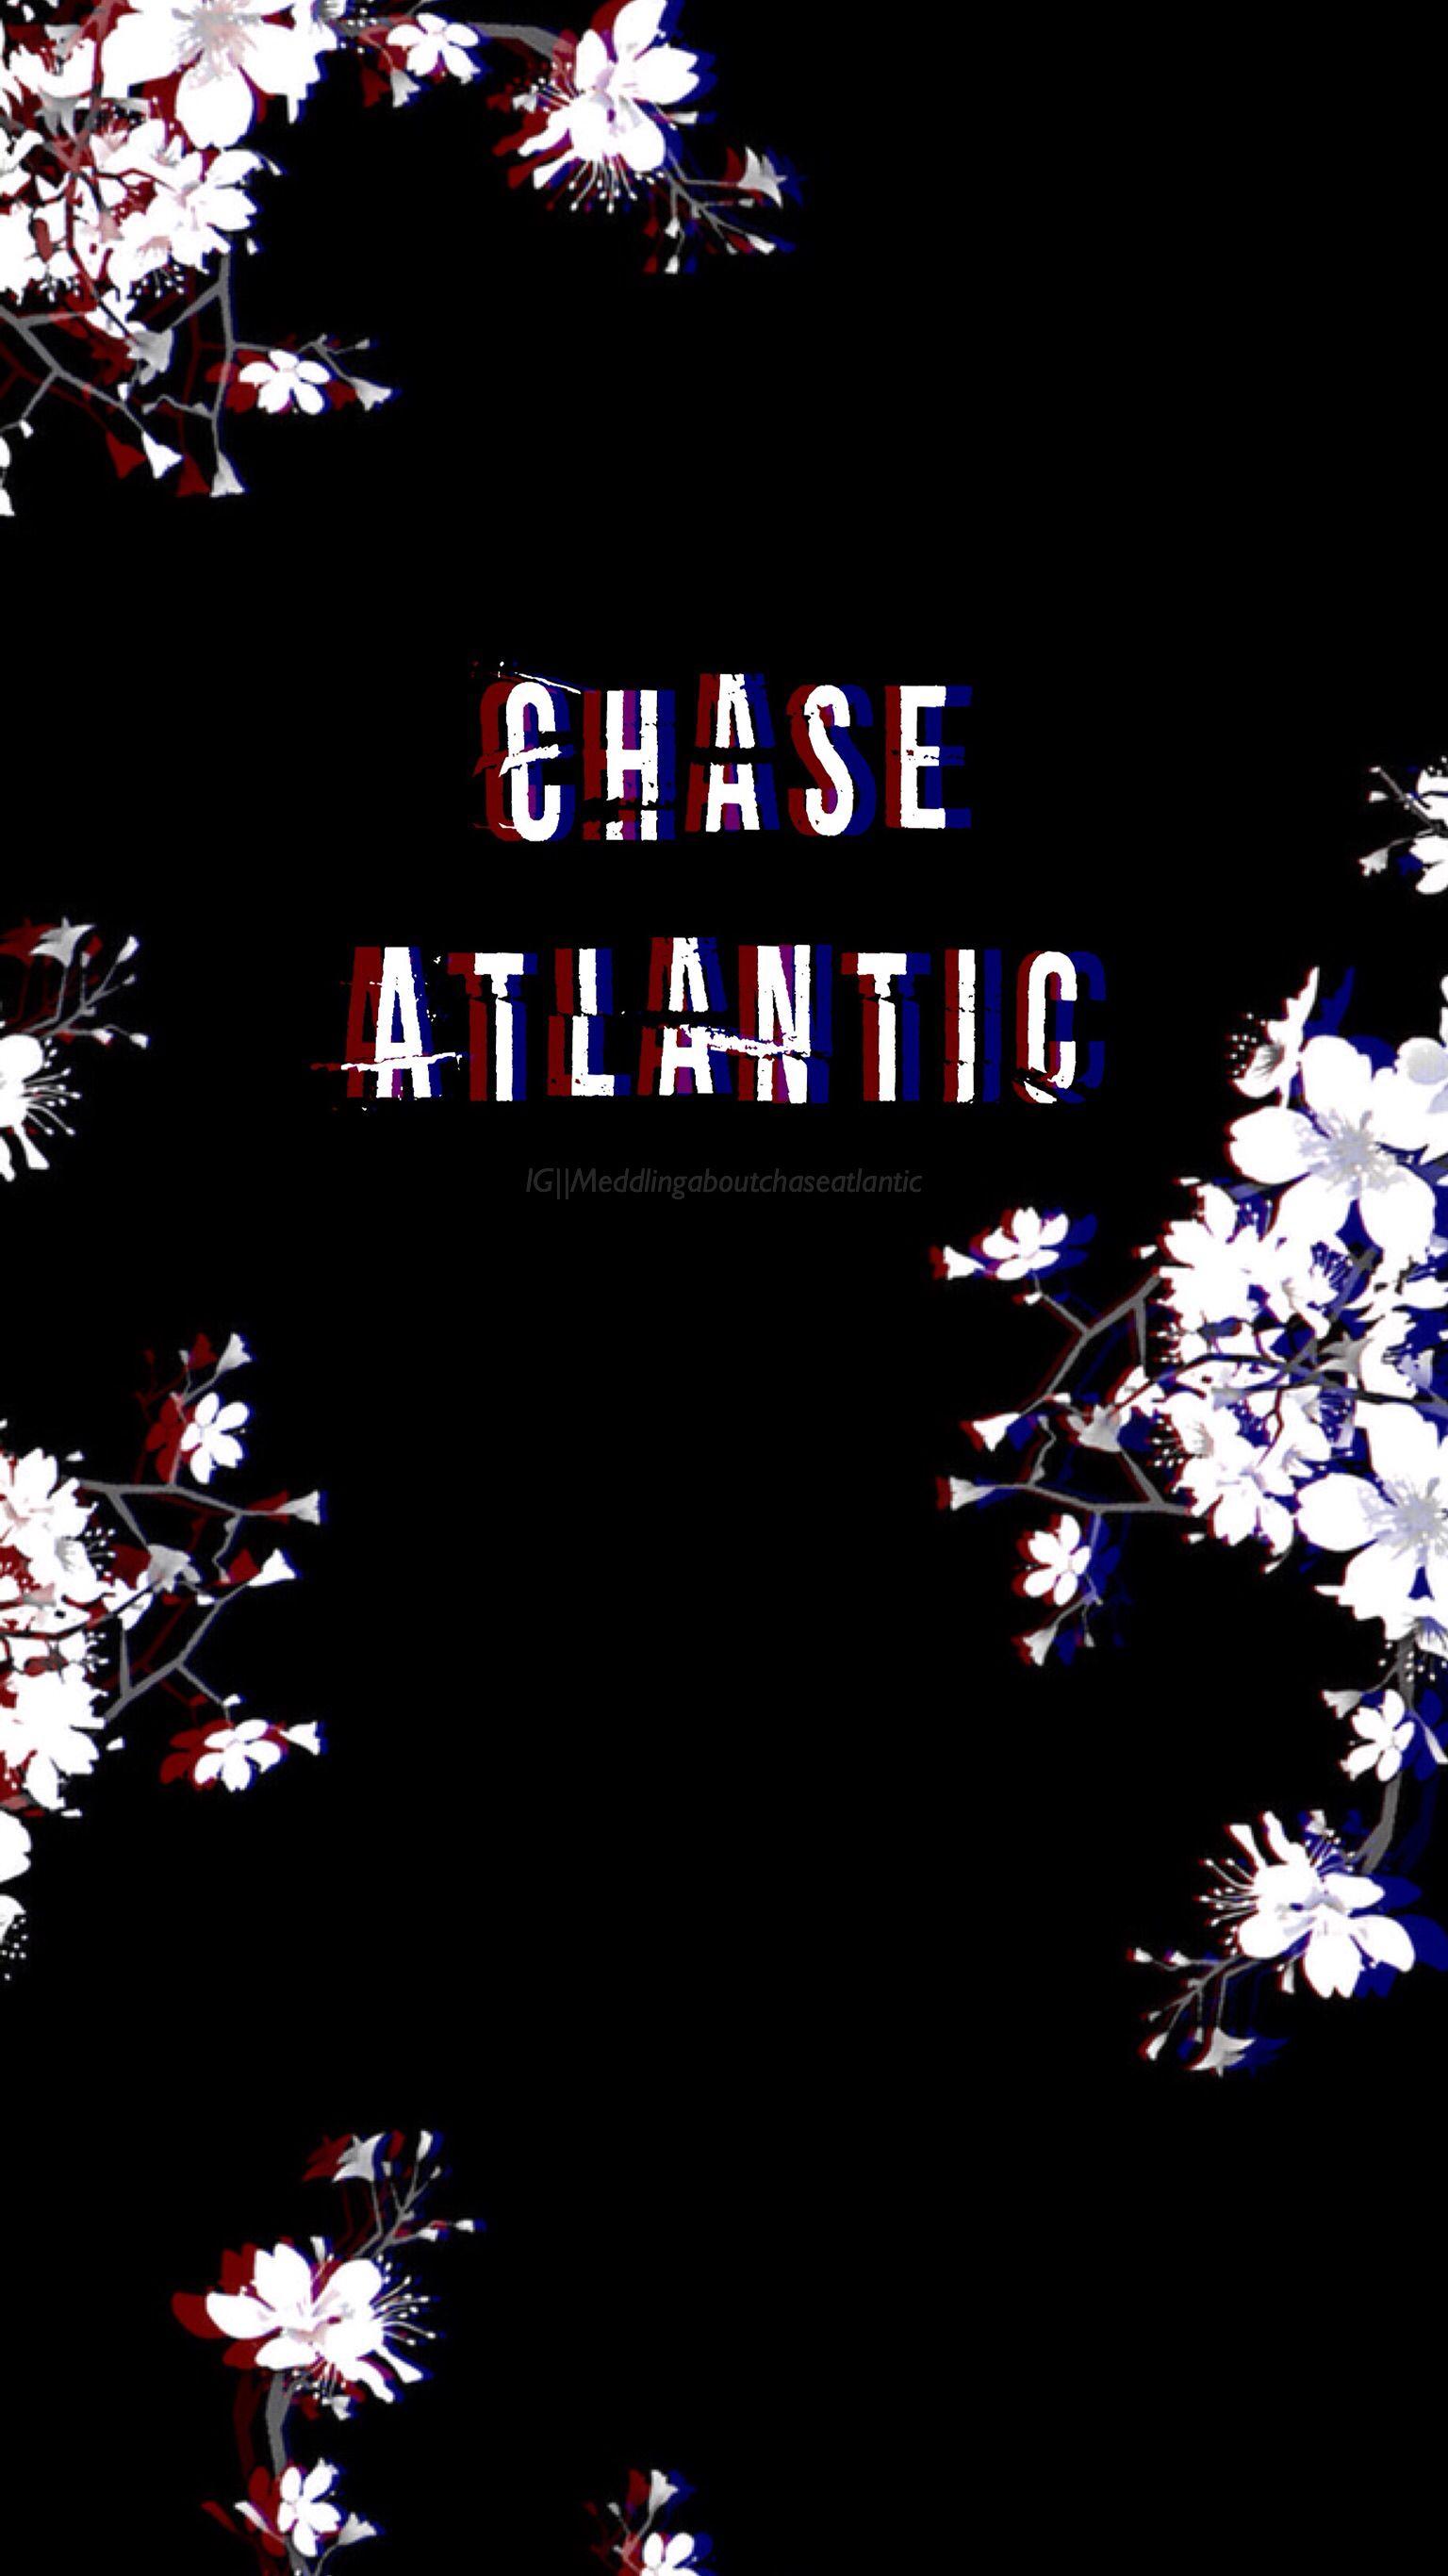 Best Chase Atlantic image. Love of my live, Types